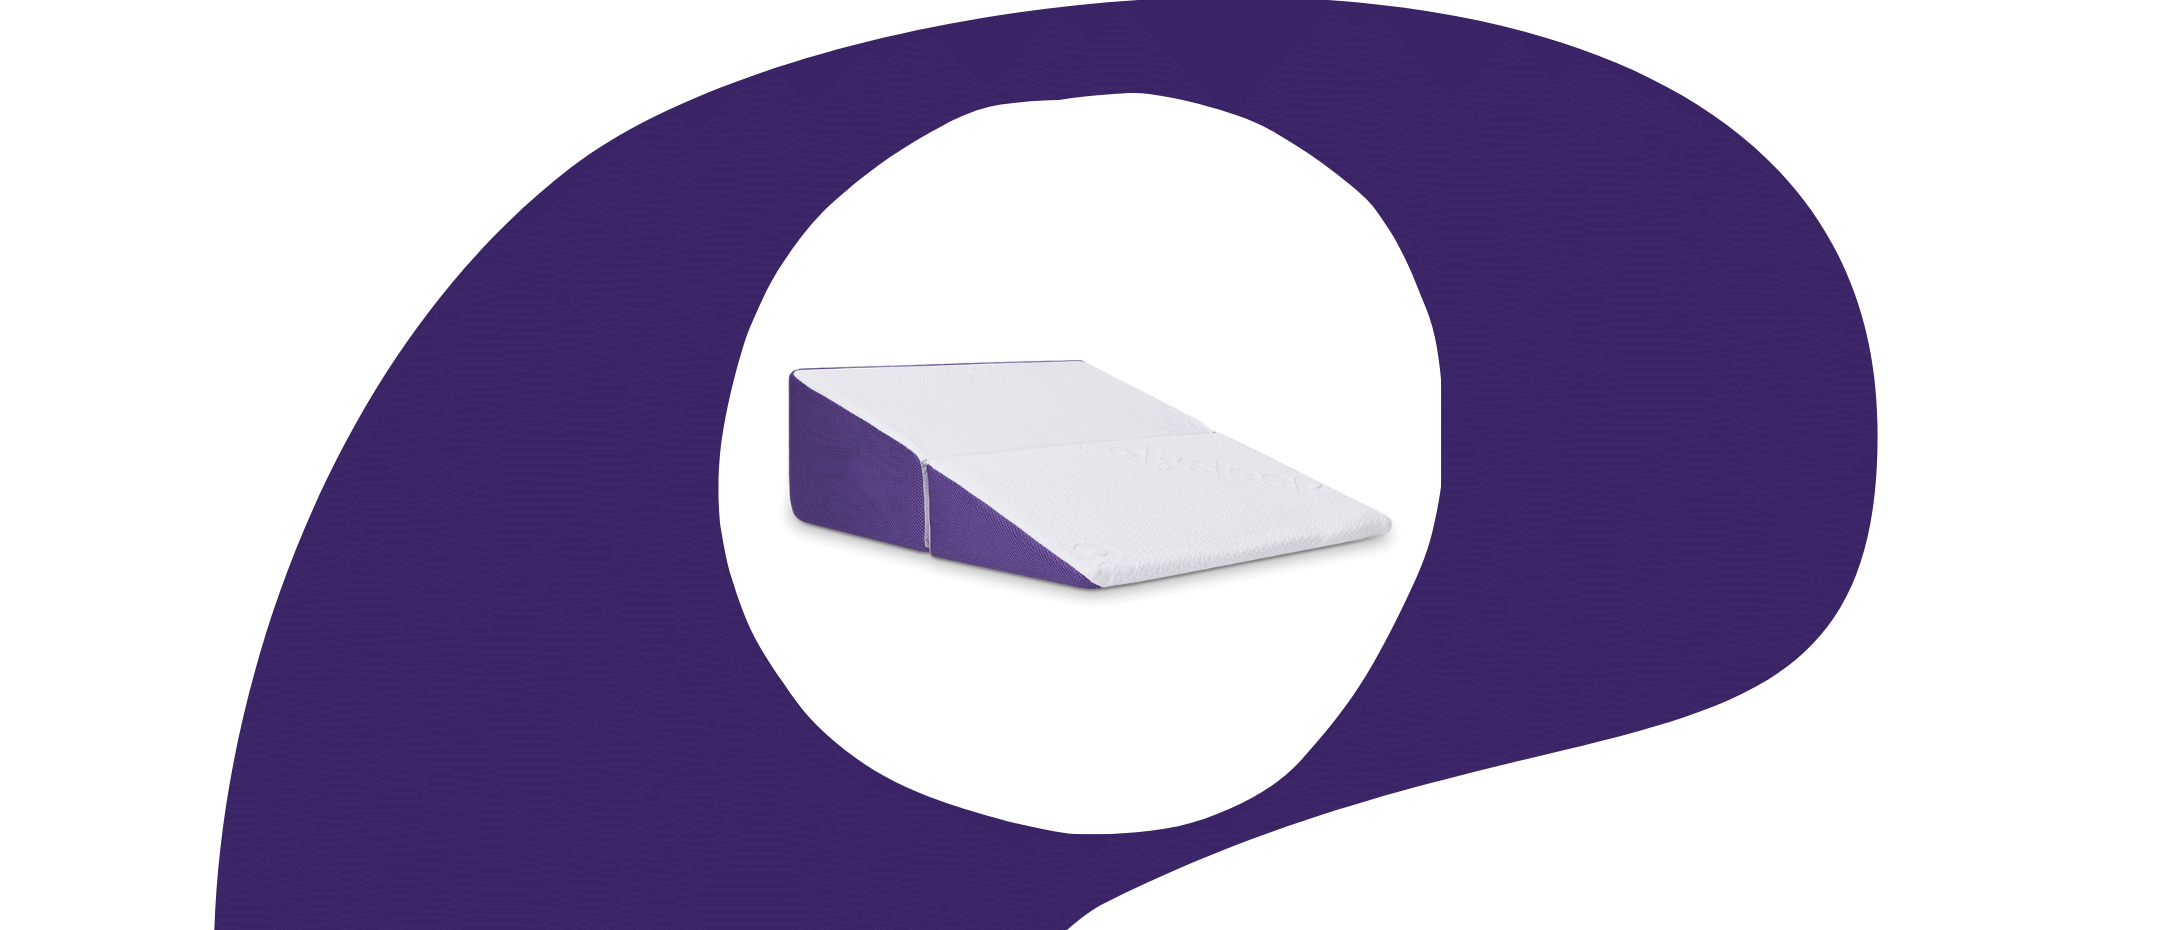 The Polysleep Wedge pillow made in Canada